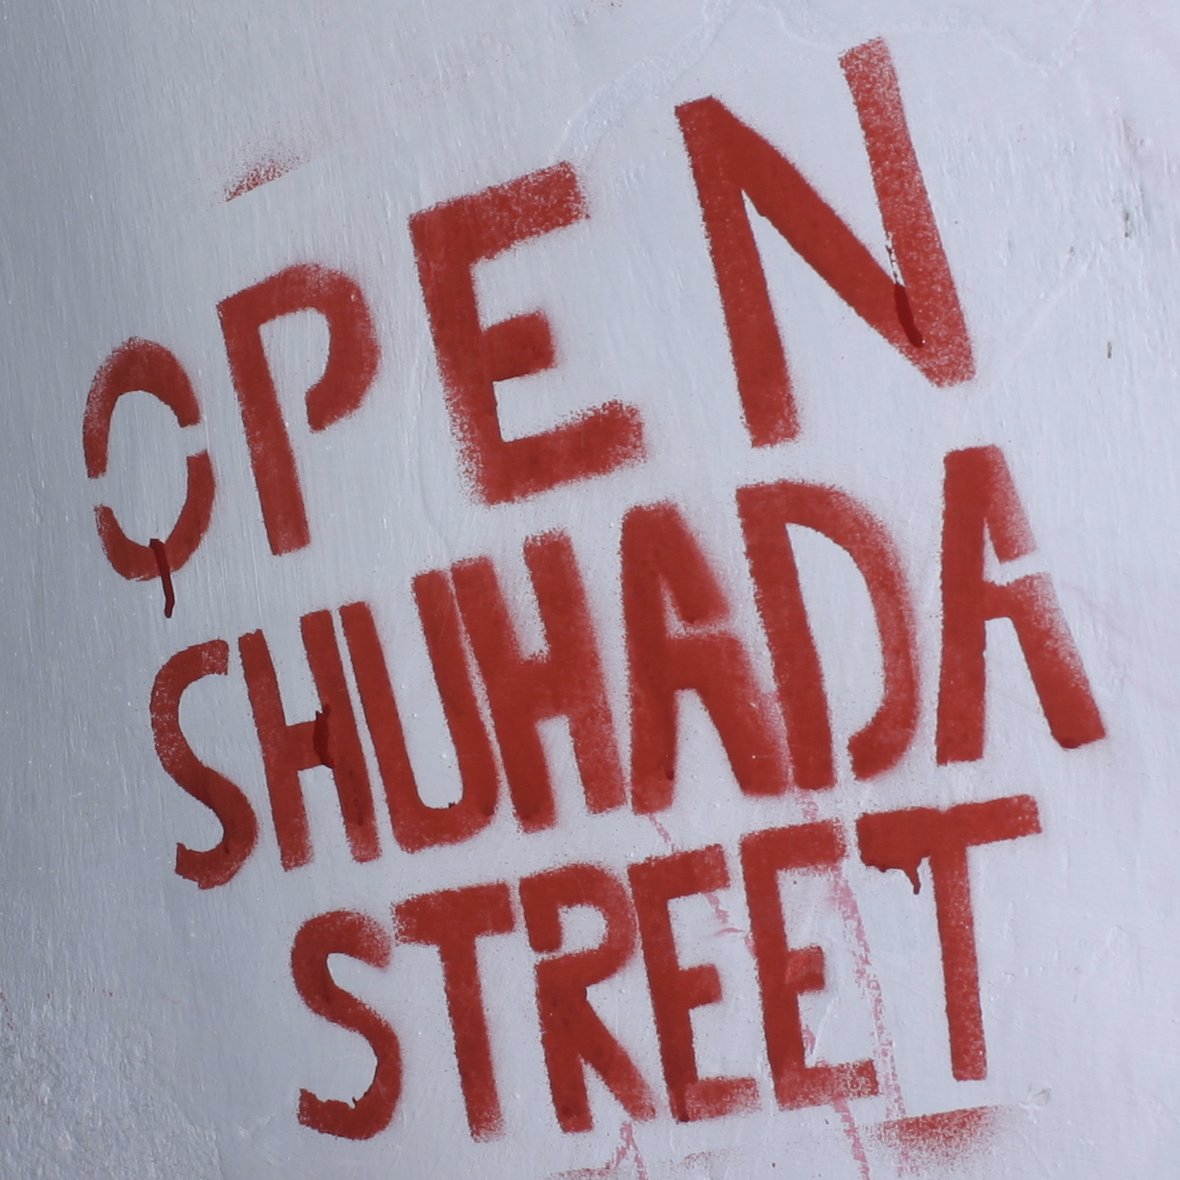 Join the International Action Day “Open Shuhada Streets!”